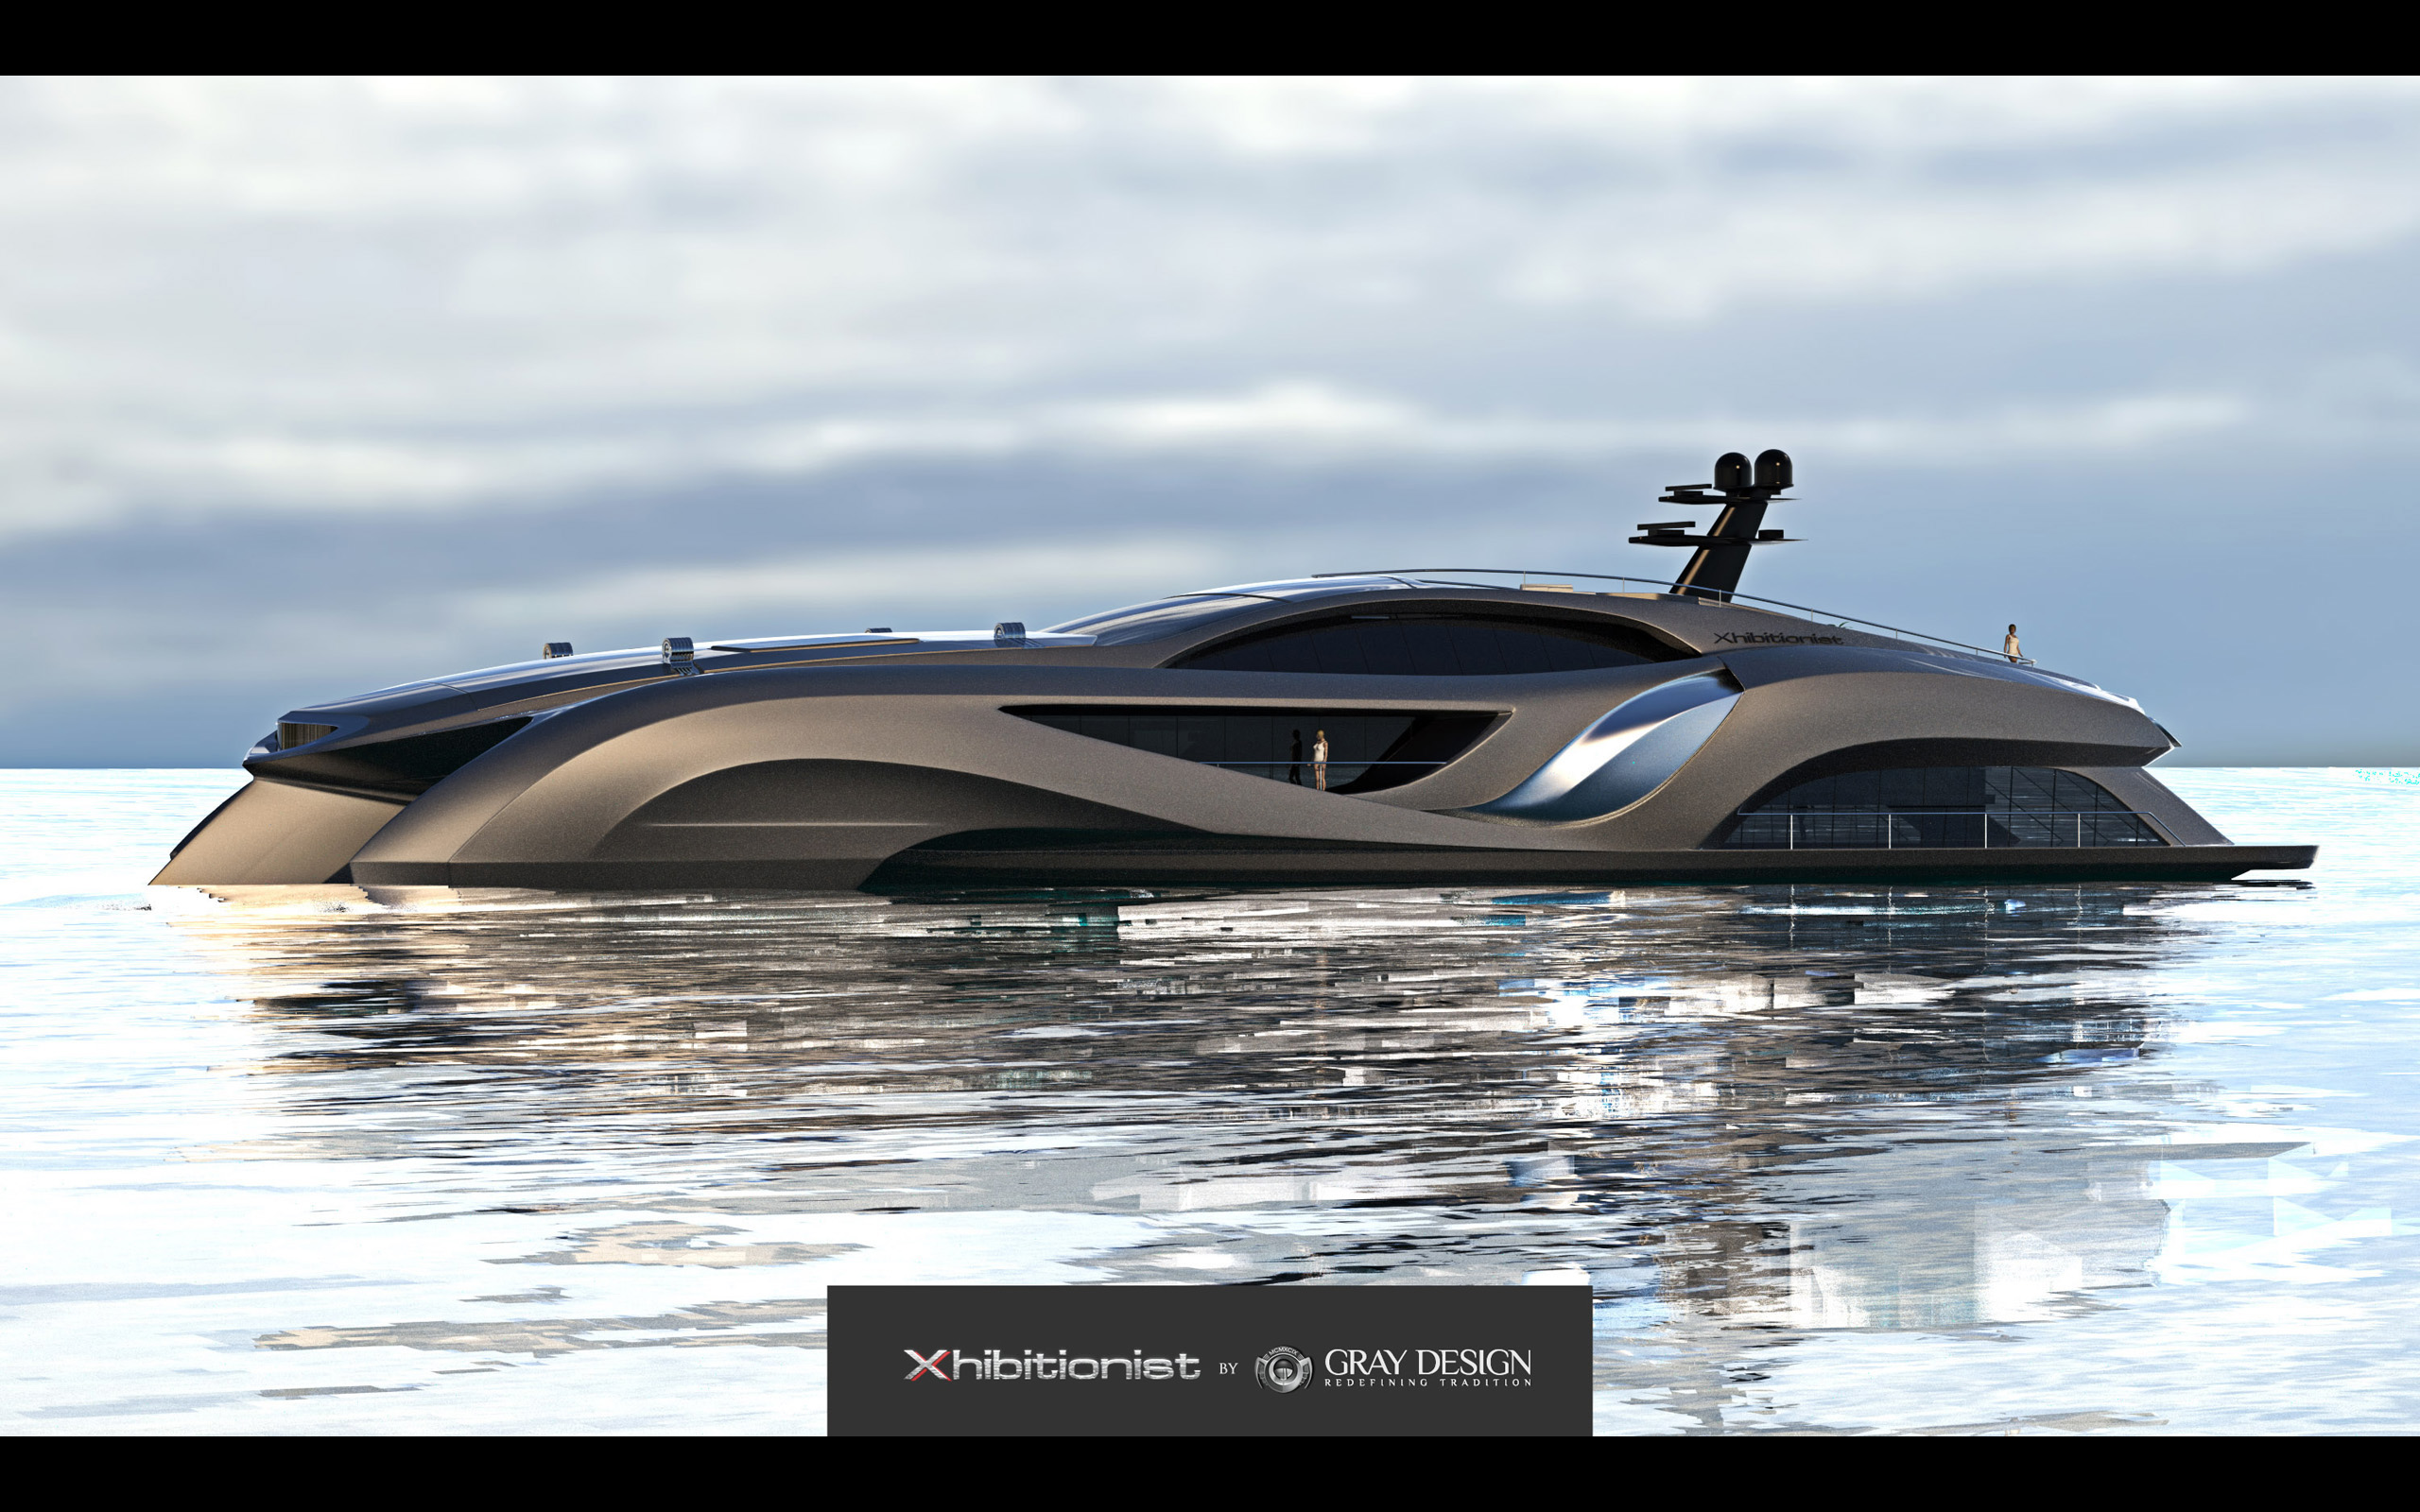 2013, Gray, Design, Strand, Craft, 166, Xhibitionist, Yacht, Concept, Boat, Boats, Ship, Ships, Luxury Wallpaper